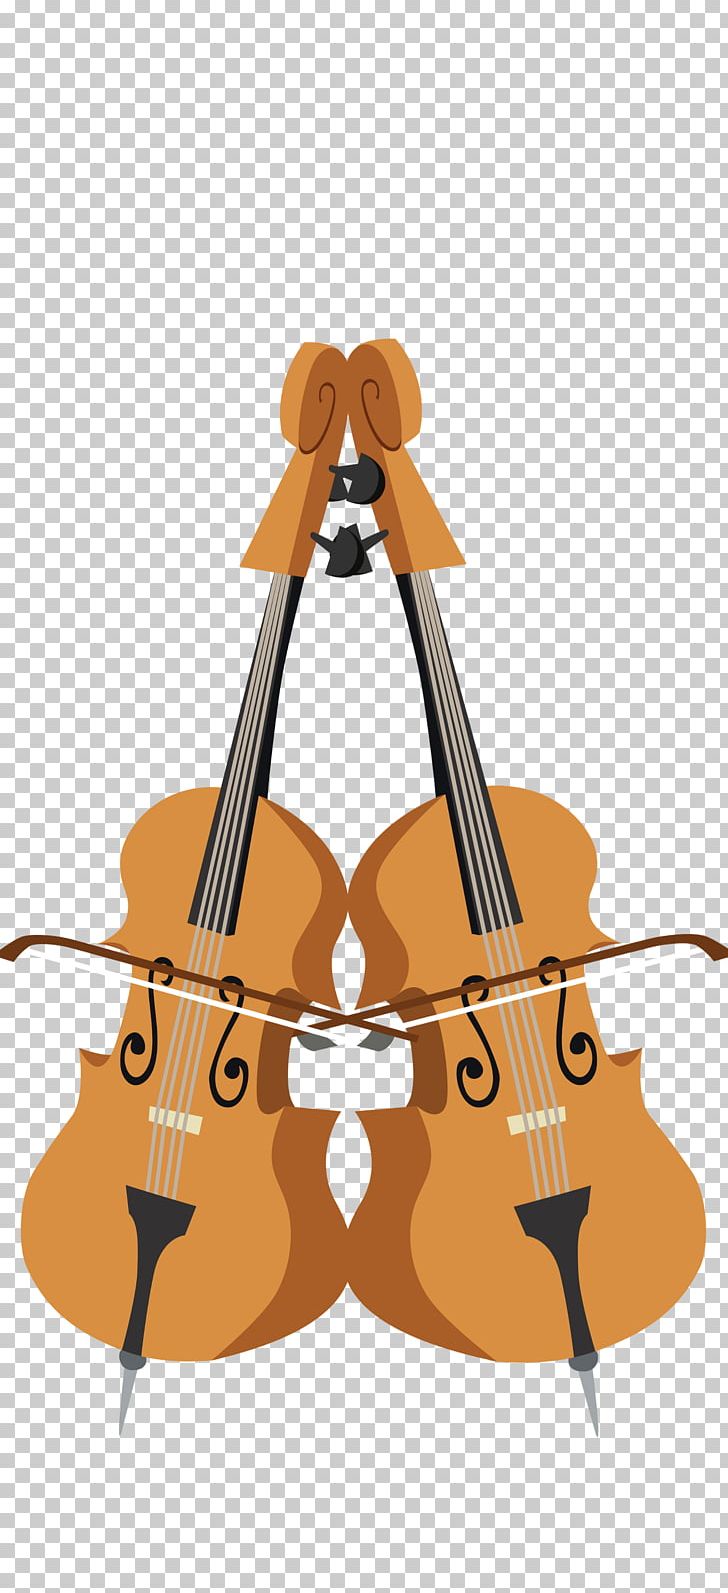 Violone Violin Cello Double Bass Viola PNG, Clipart, Author, Bowed String Instrument, Cartoon, Cellist, Cello Free PNG Download